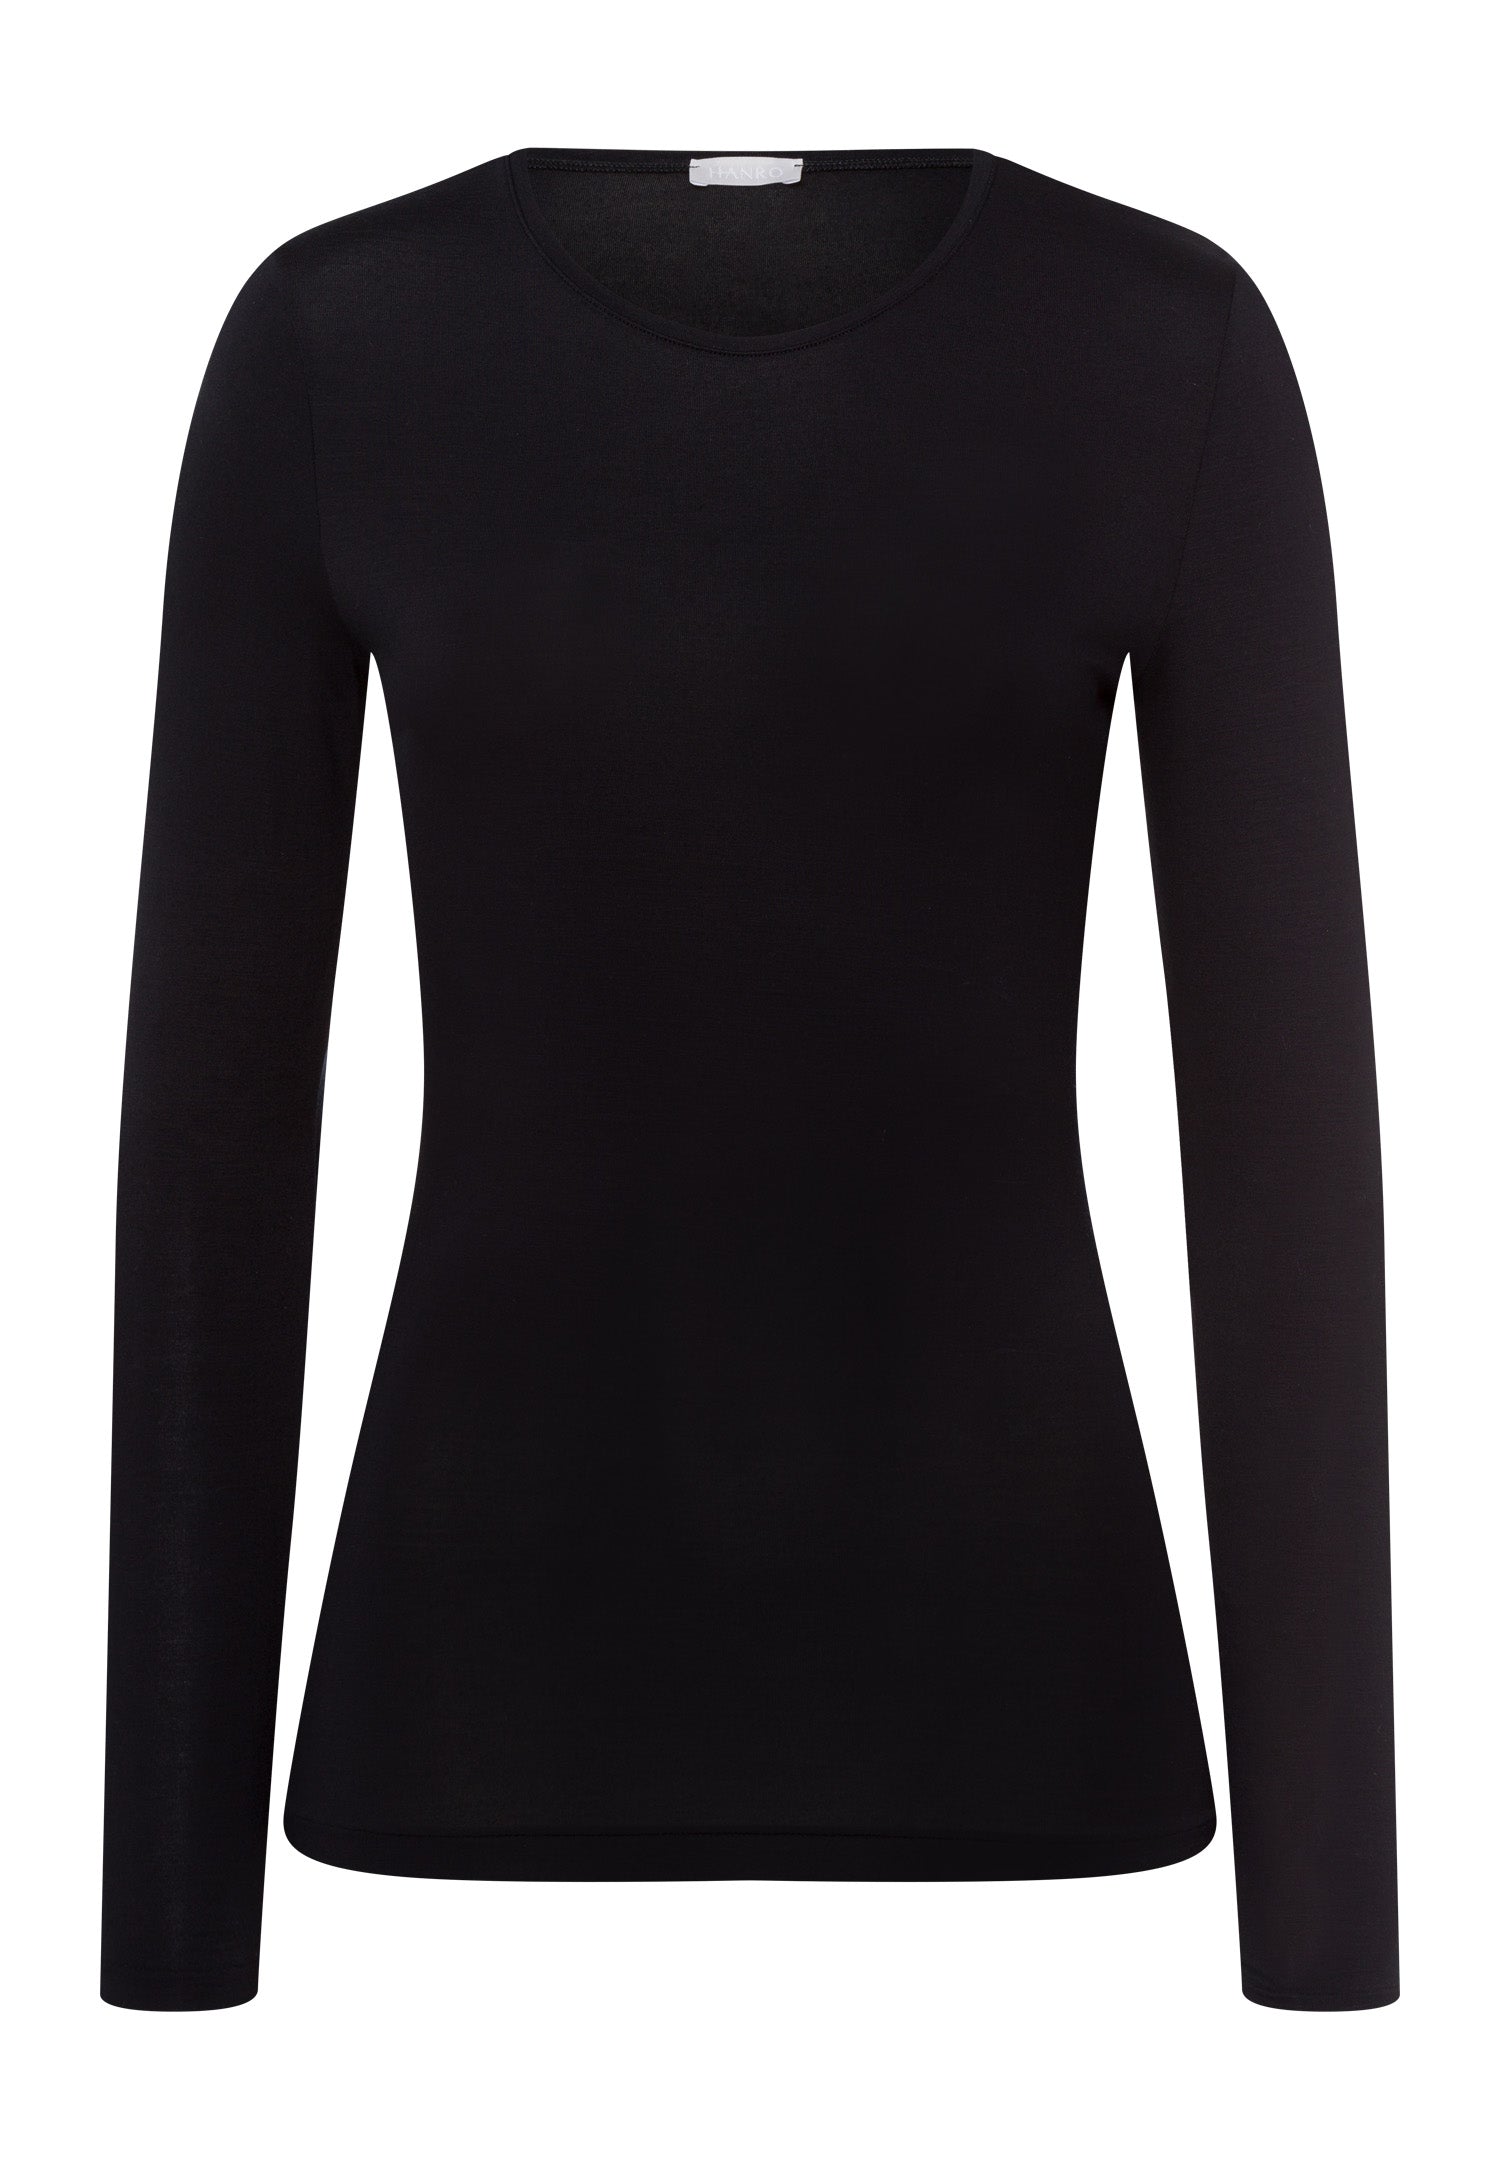 71259 Soft Touch Long Sleeve Top - 019 Black